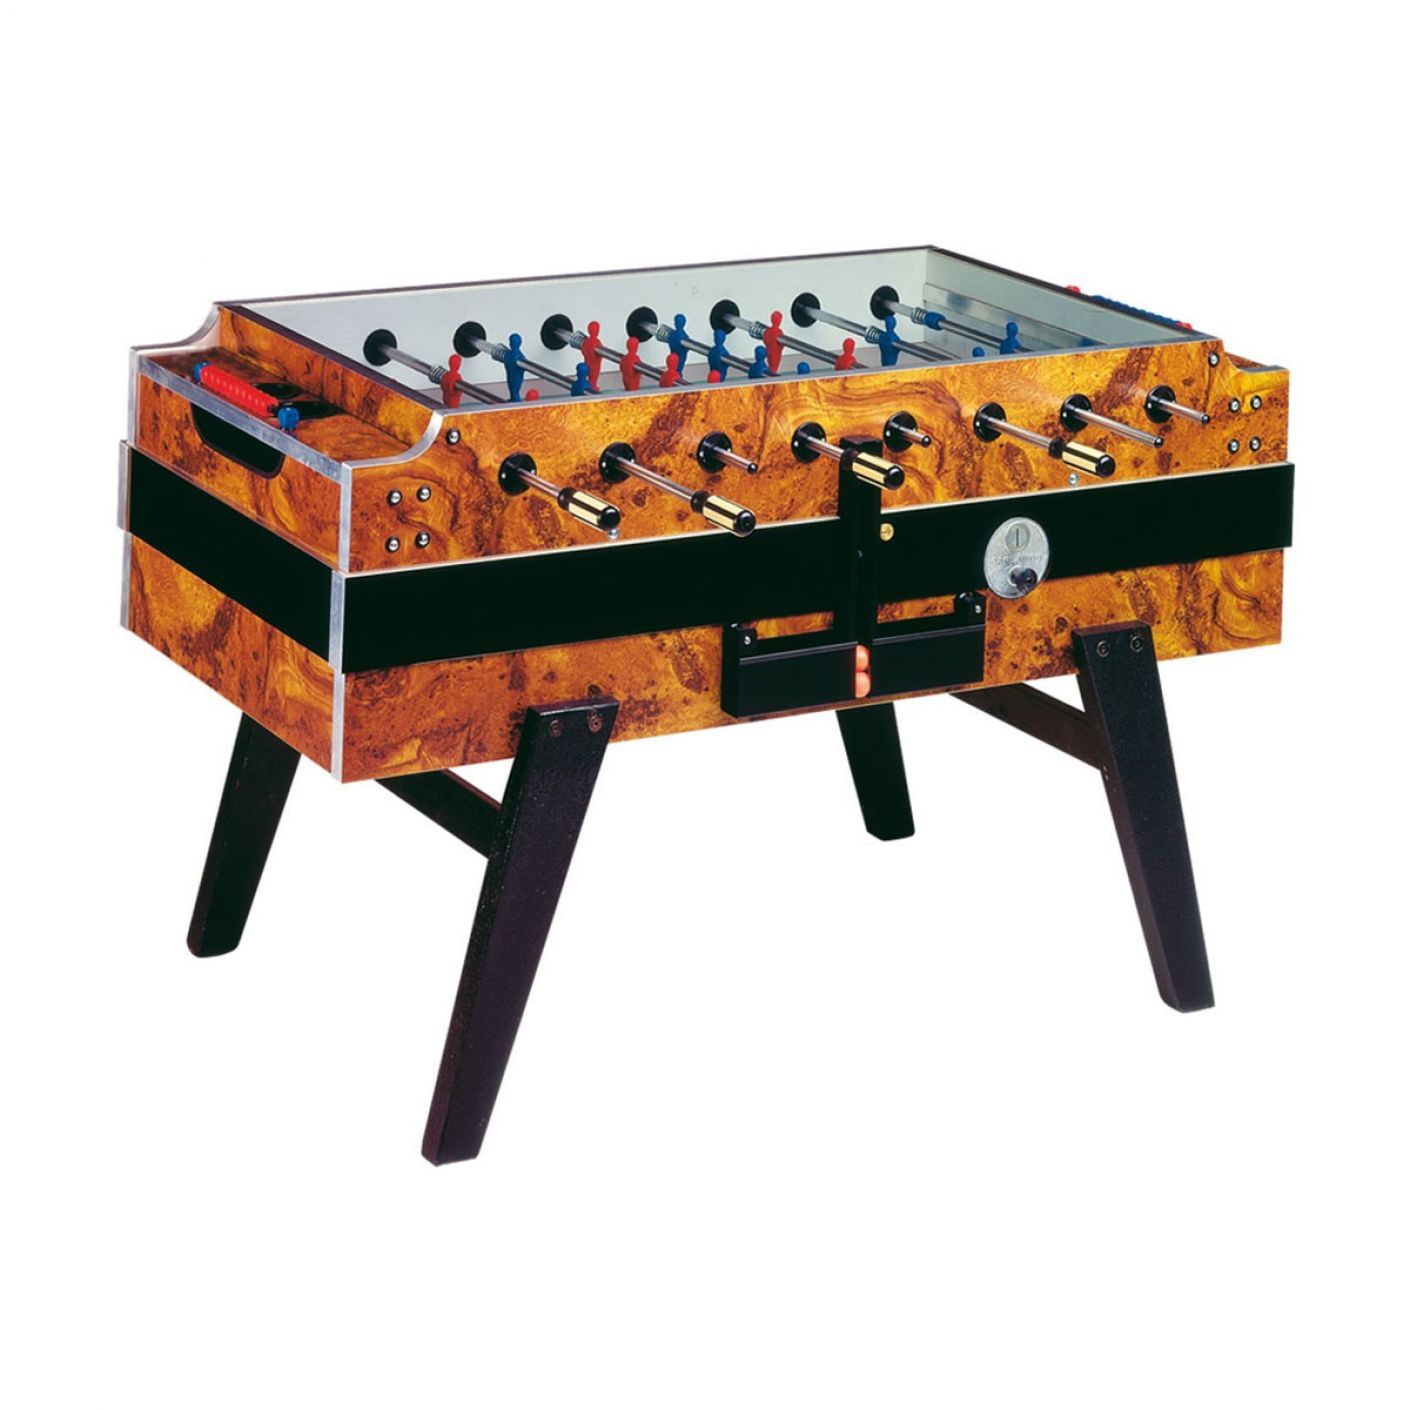 Garlando Table Football Covered with retracting rods